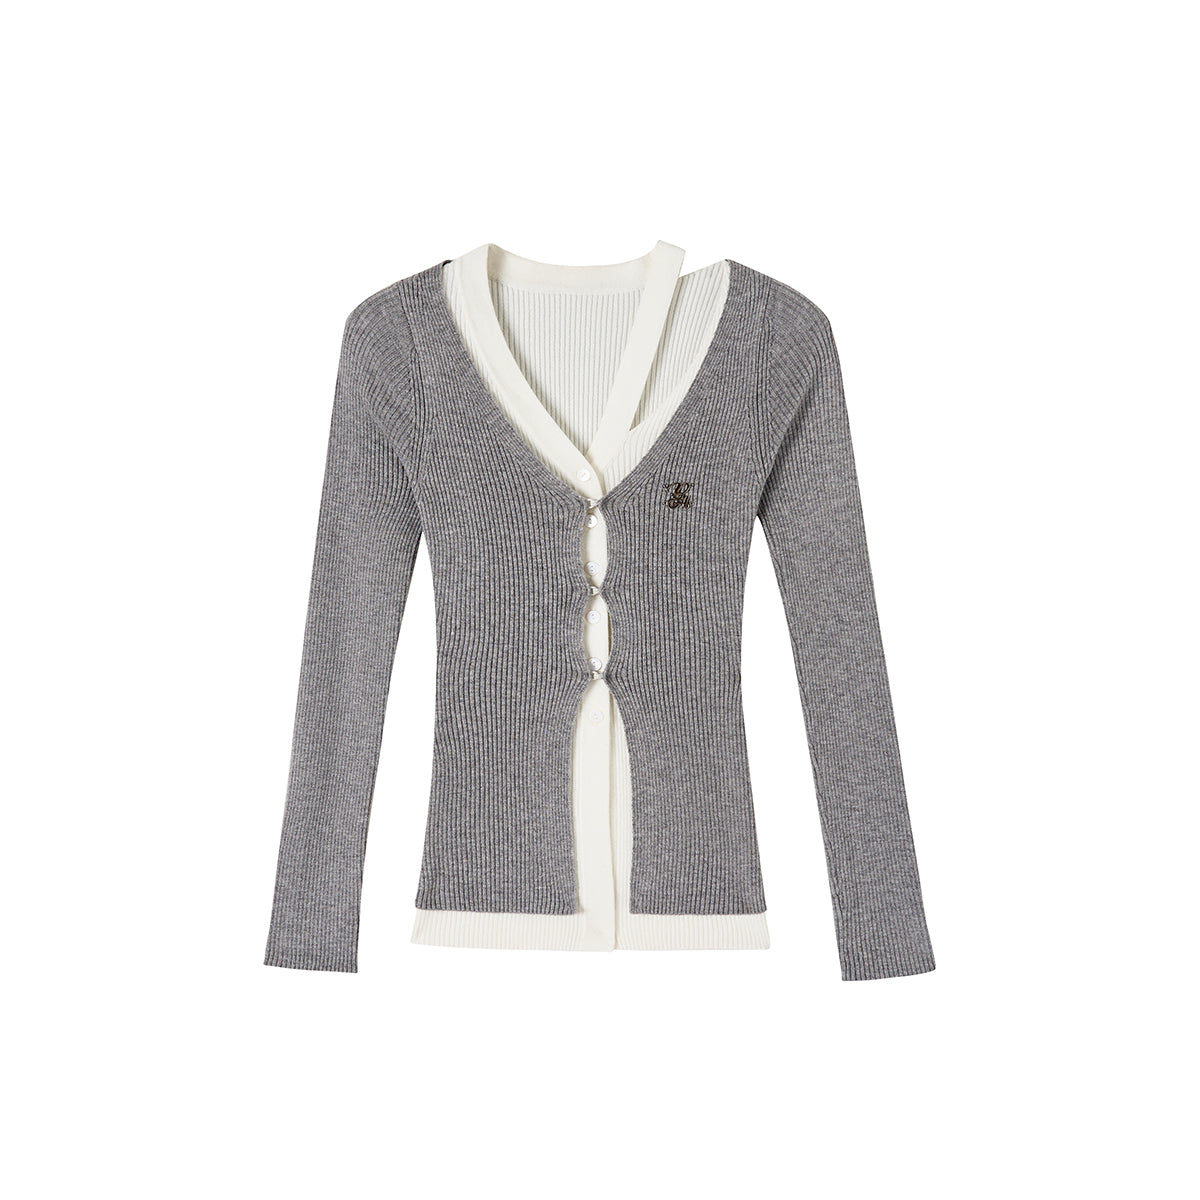 Elegant Grey Knit Long Cardigan With Hollow Out Design - chiclara